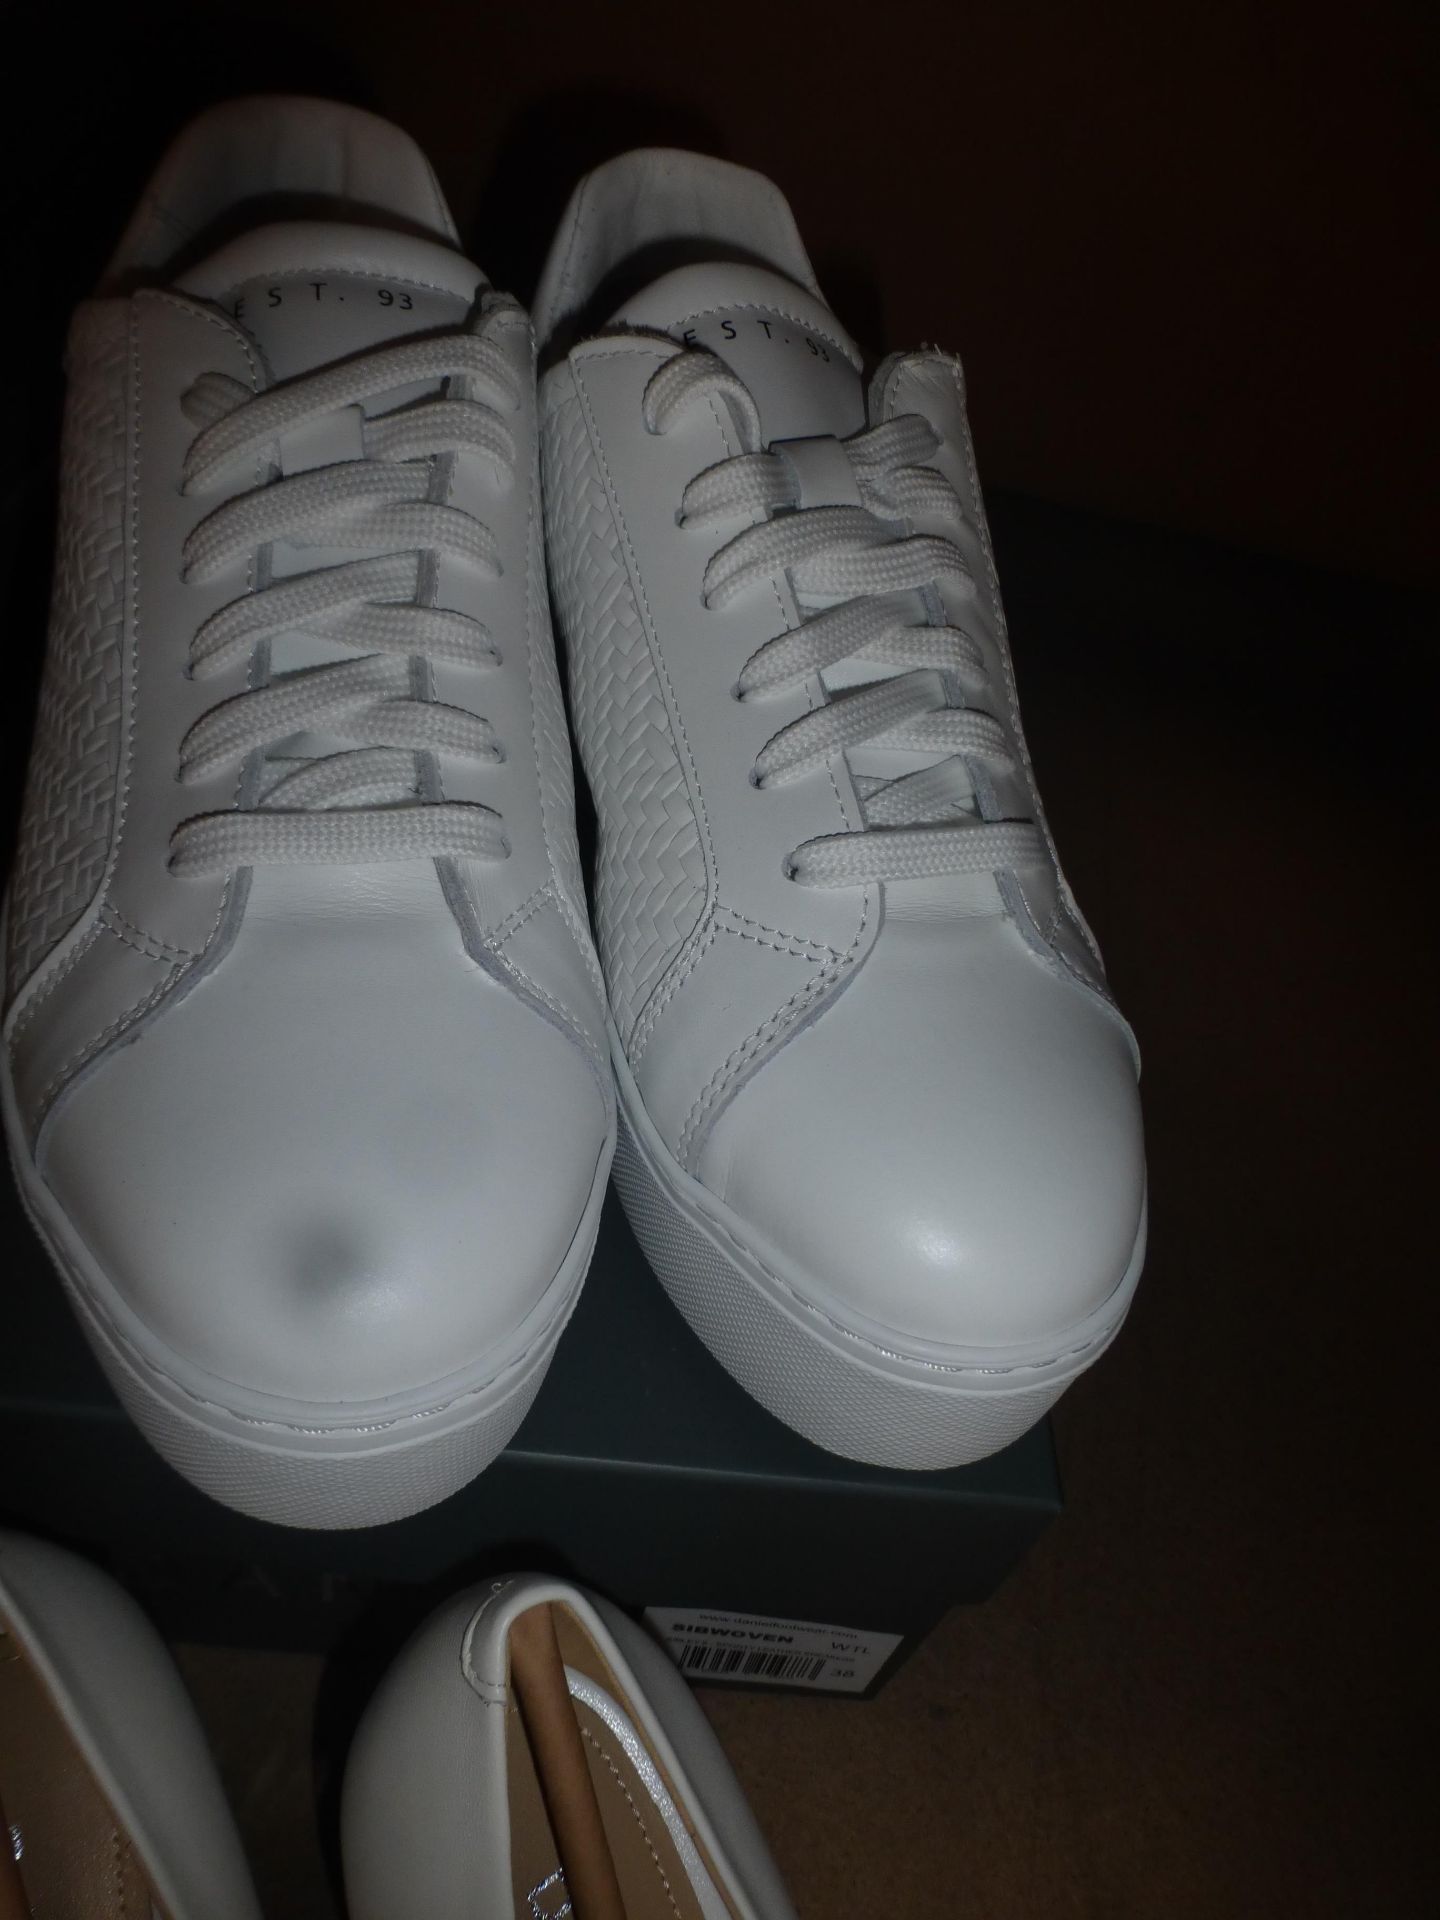 1 x pair of Daniels Trainers, size 5 and 1 x pair of Stormi heels, size 5 - new in box (E8B)